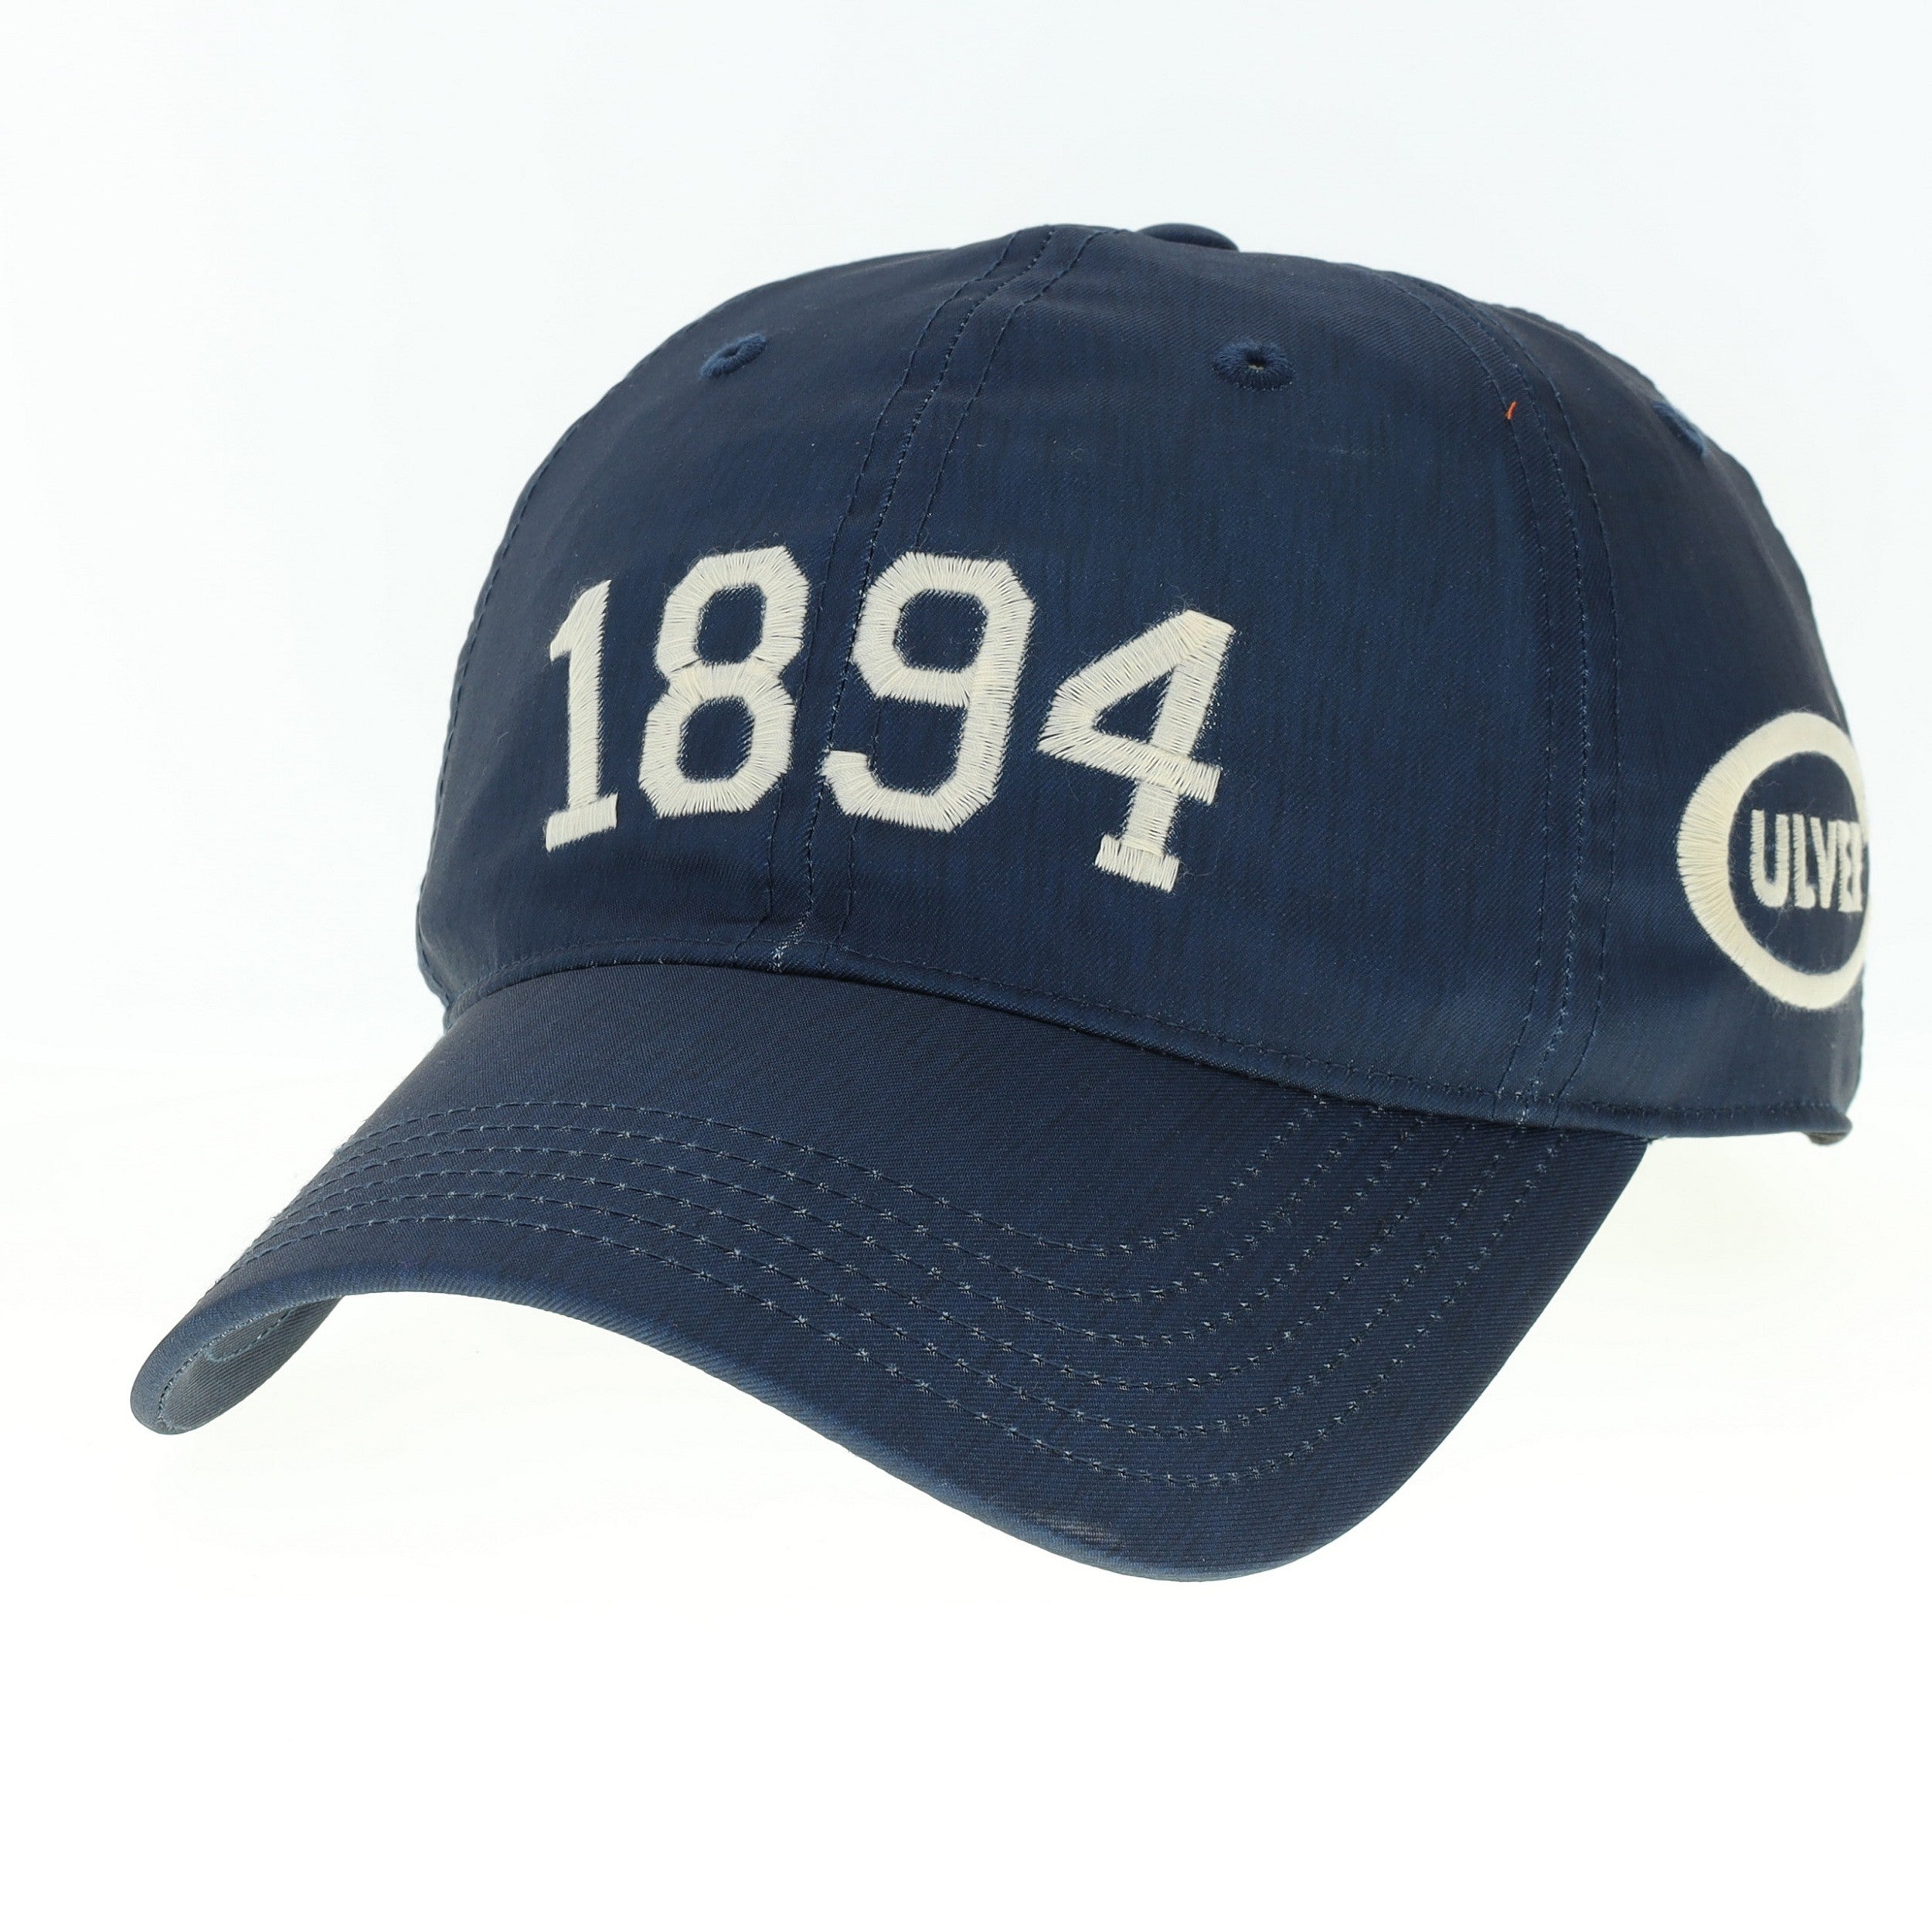 Our 1894 Recycled Fabric Reclaim Hat - Navy